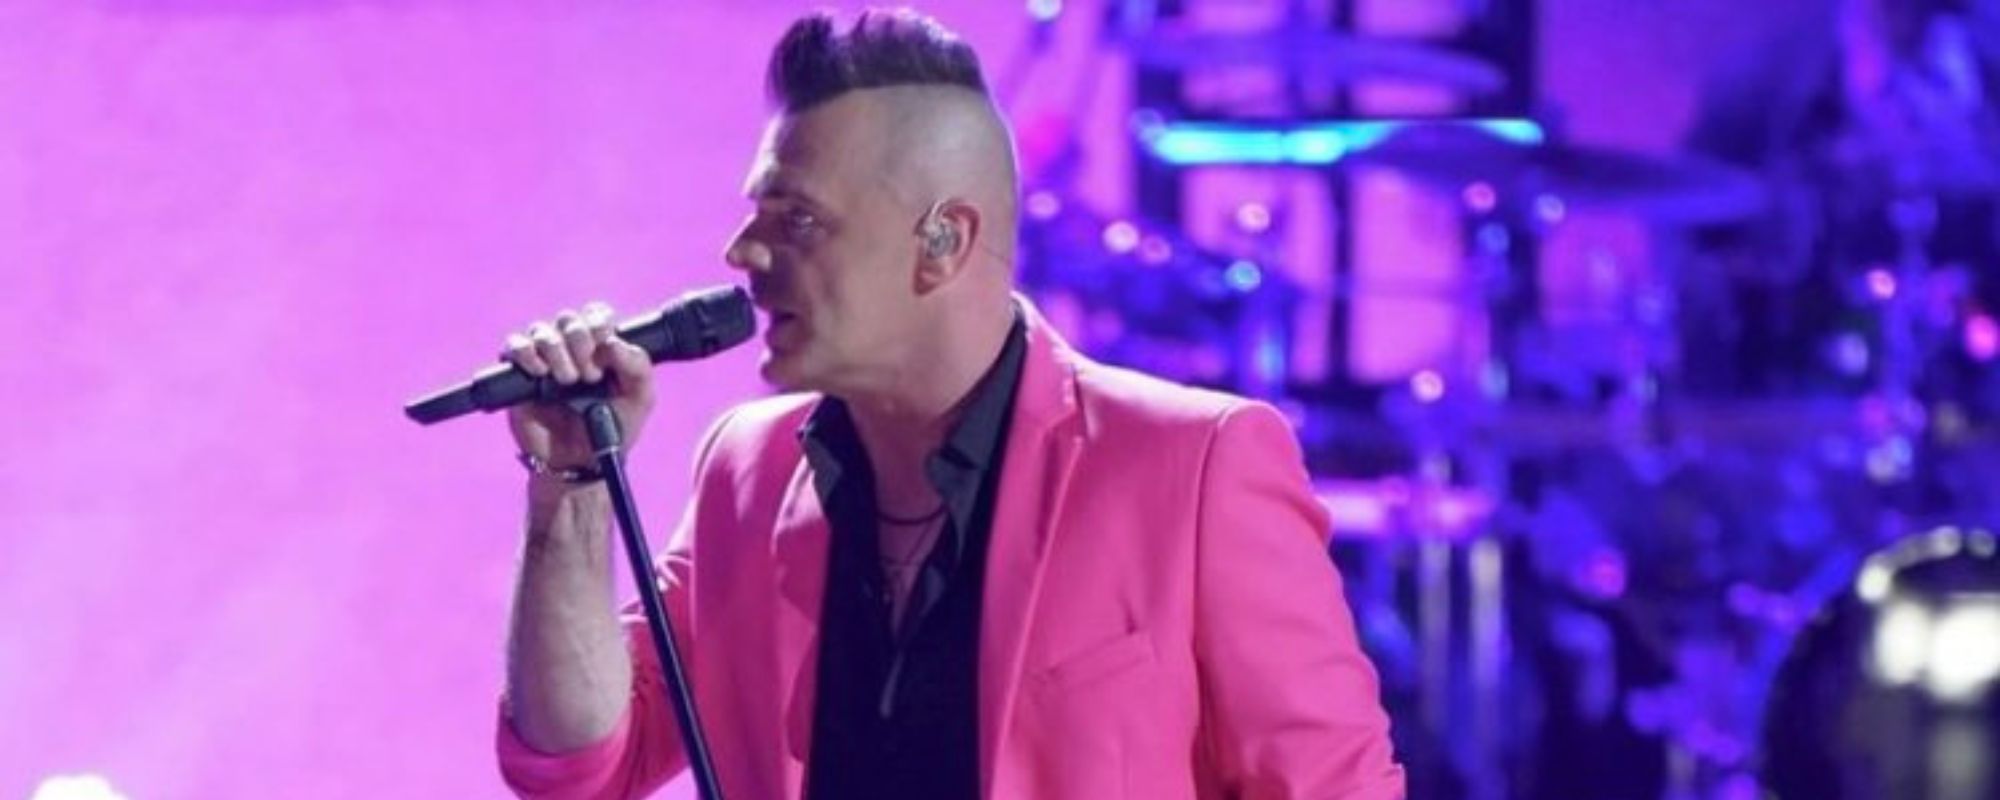 Watch ‘The Voice’ Favorites Nathan Chester, Bryan Olesen, and Maddi Jane’s Heavenly Trio Cover of The Cure